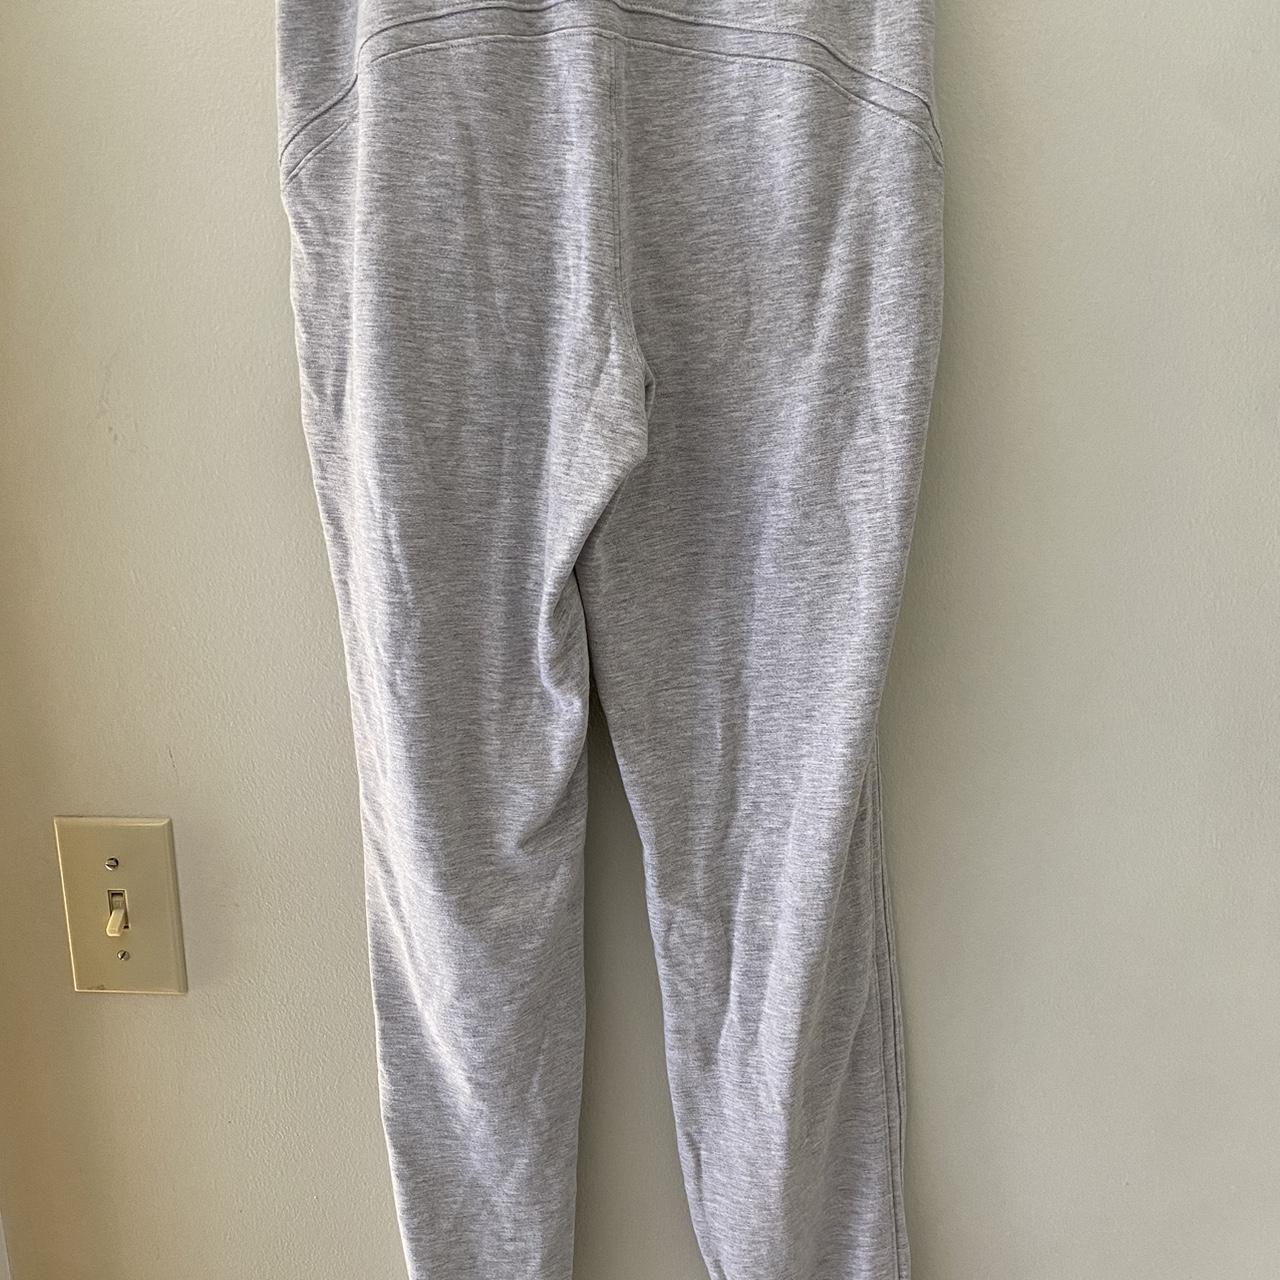 LULULEMON SCUBA JOGGERS! these are a size 2 and in - Depop